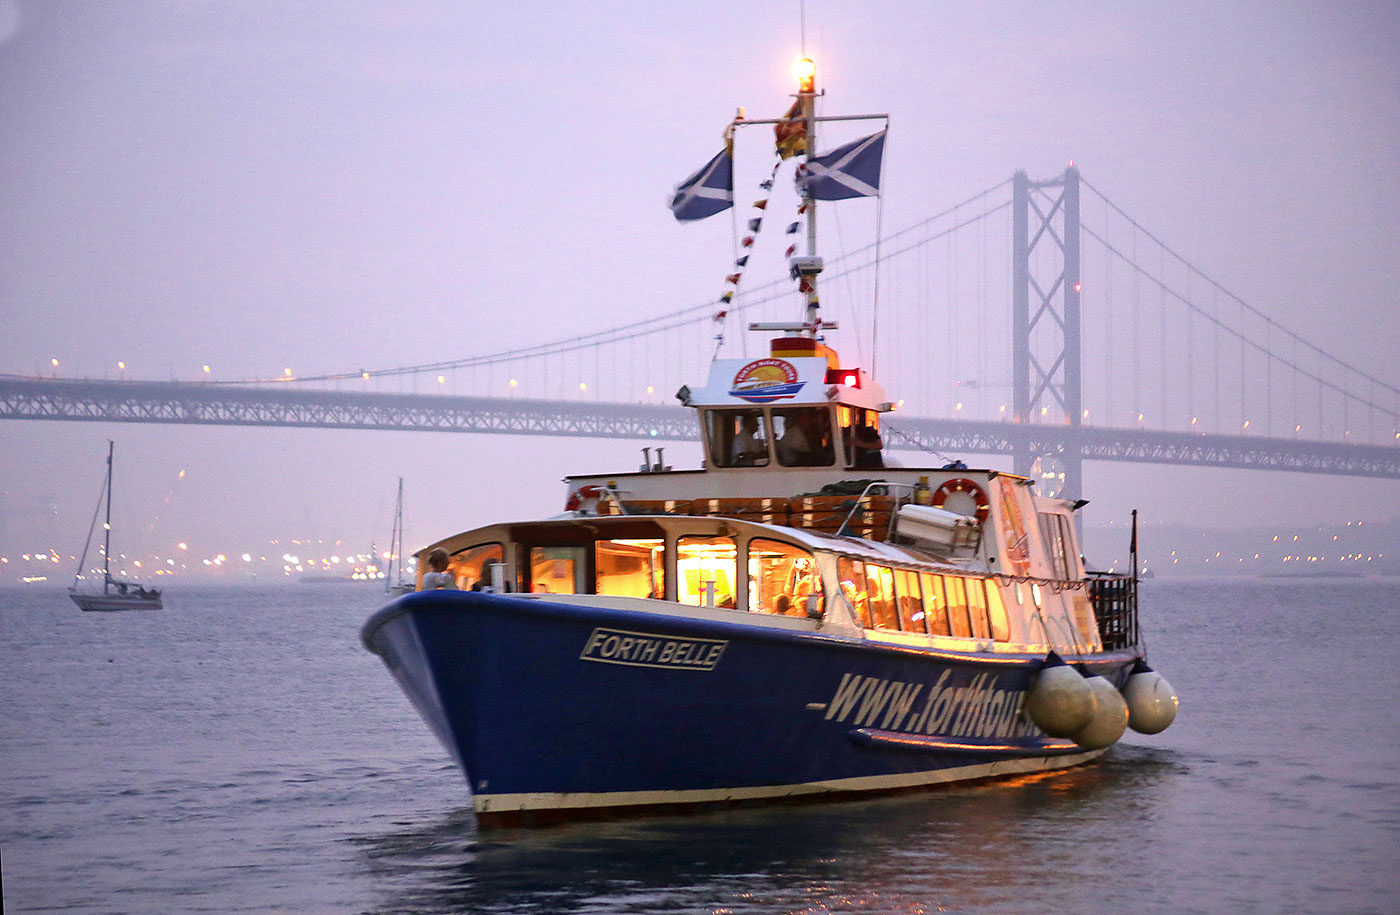 Forth Road Bridge 50th Anniversary Celebrations, September 2014  -  The cruise boat, 'Forth Belle' and its passengers departs from Hawes Pier, South Queensferry on a cruise to view the Forth Road Bridge Firework Display